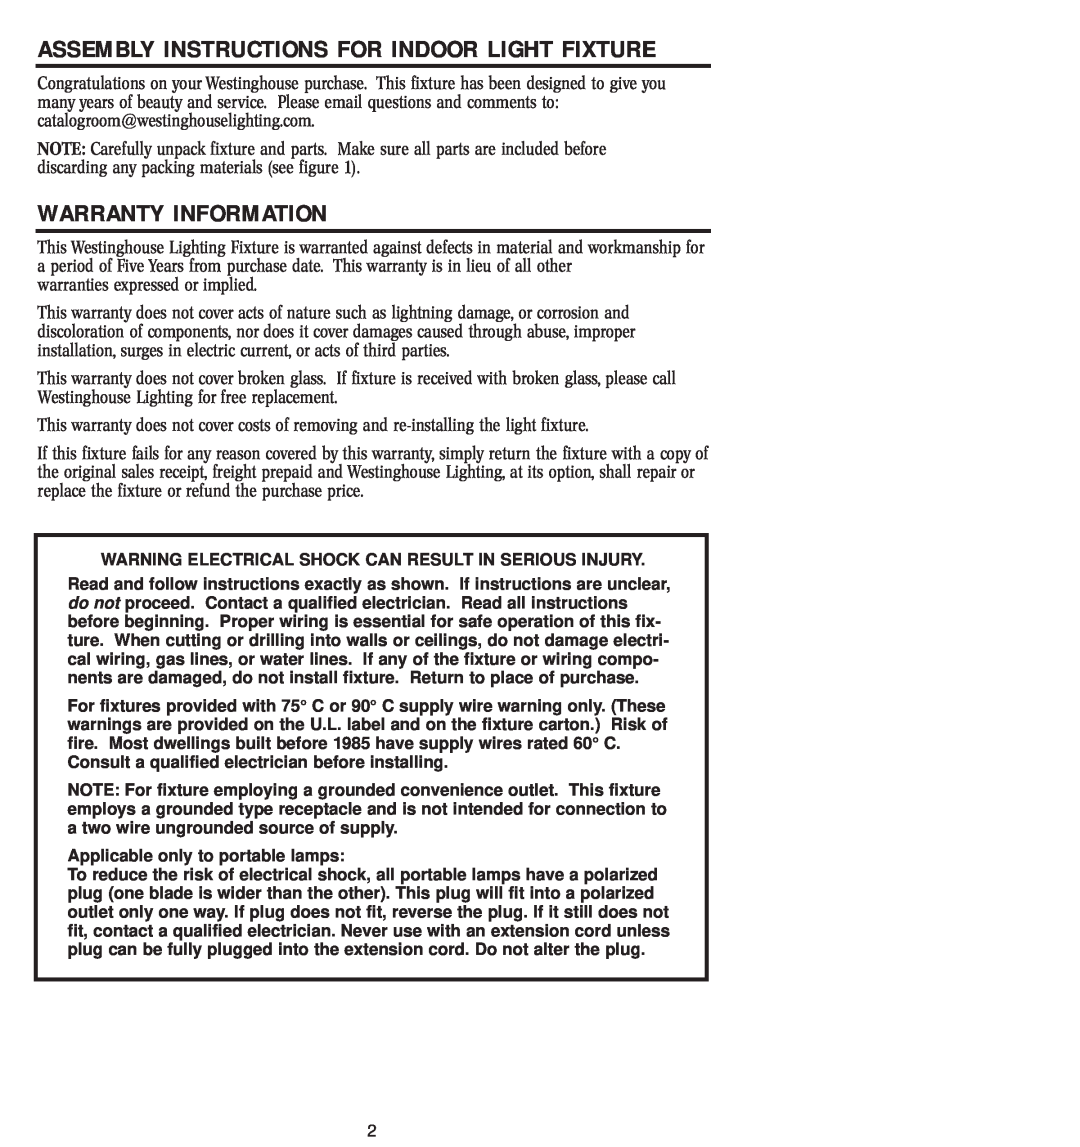 Westinghouse W-128 owner manual Warranty Information, Assembly Instructions For Indoor Light Fixture 